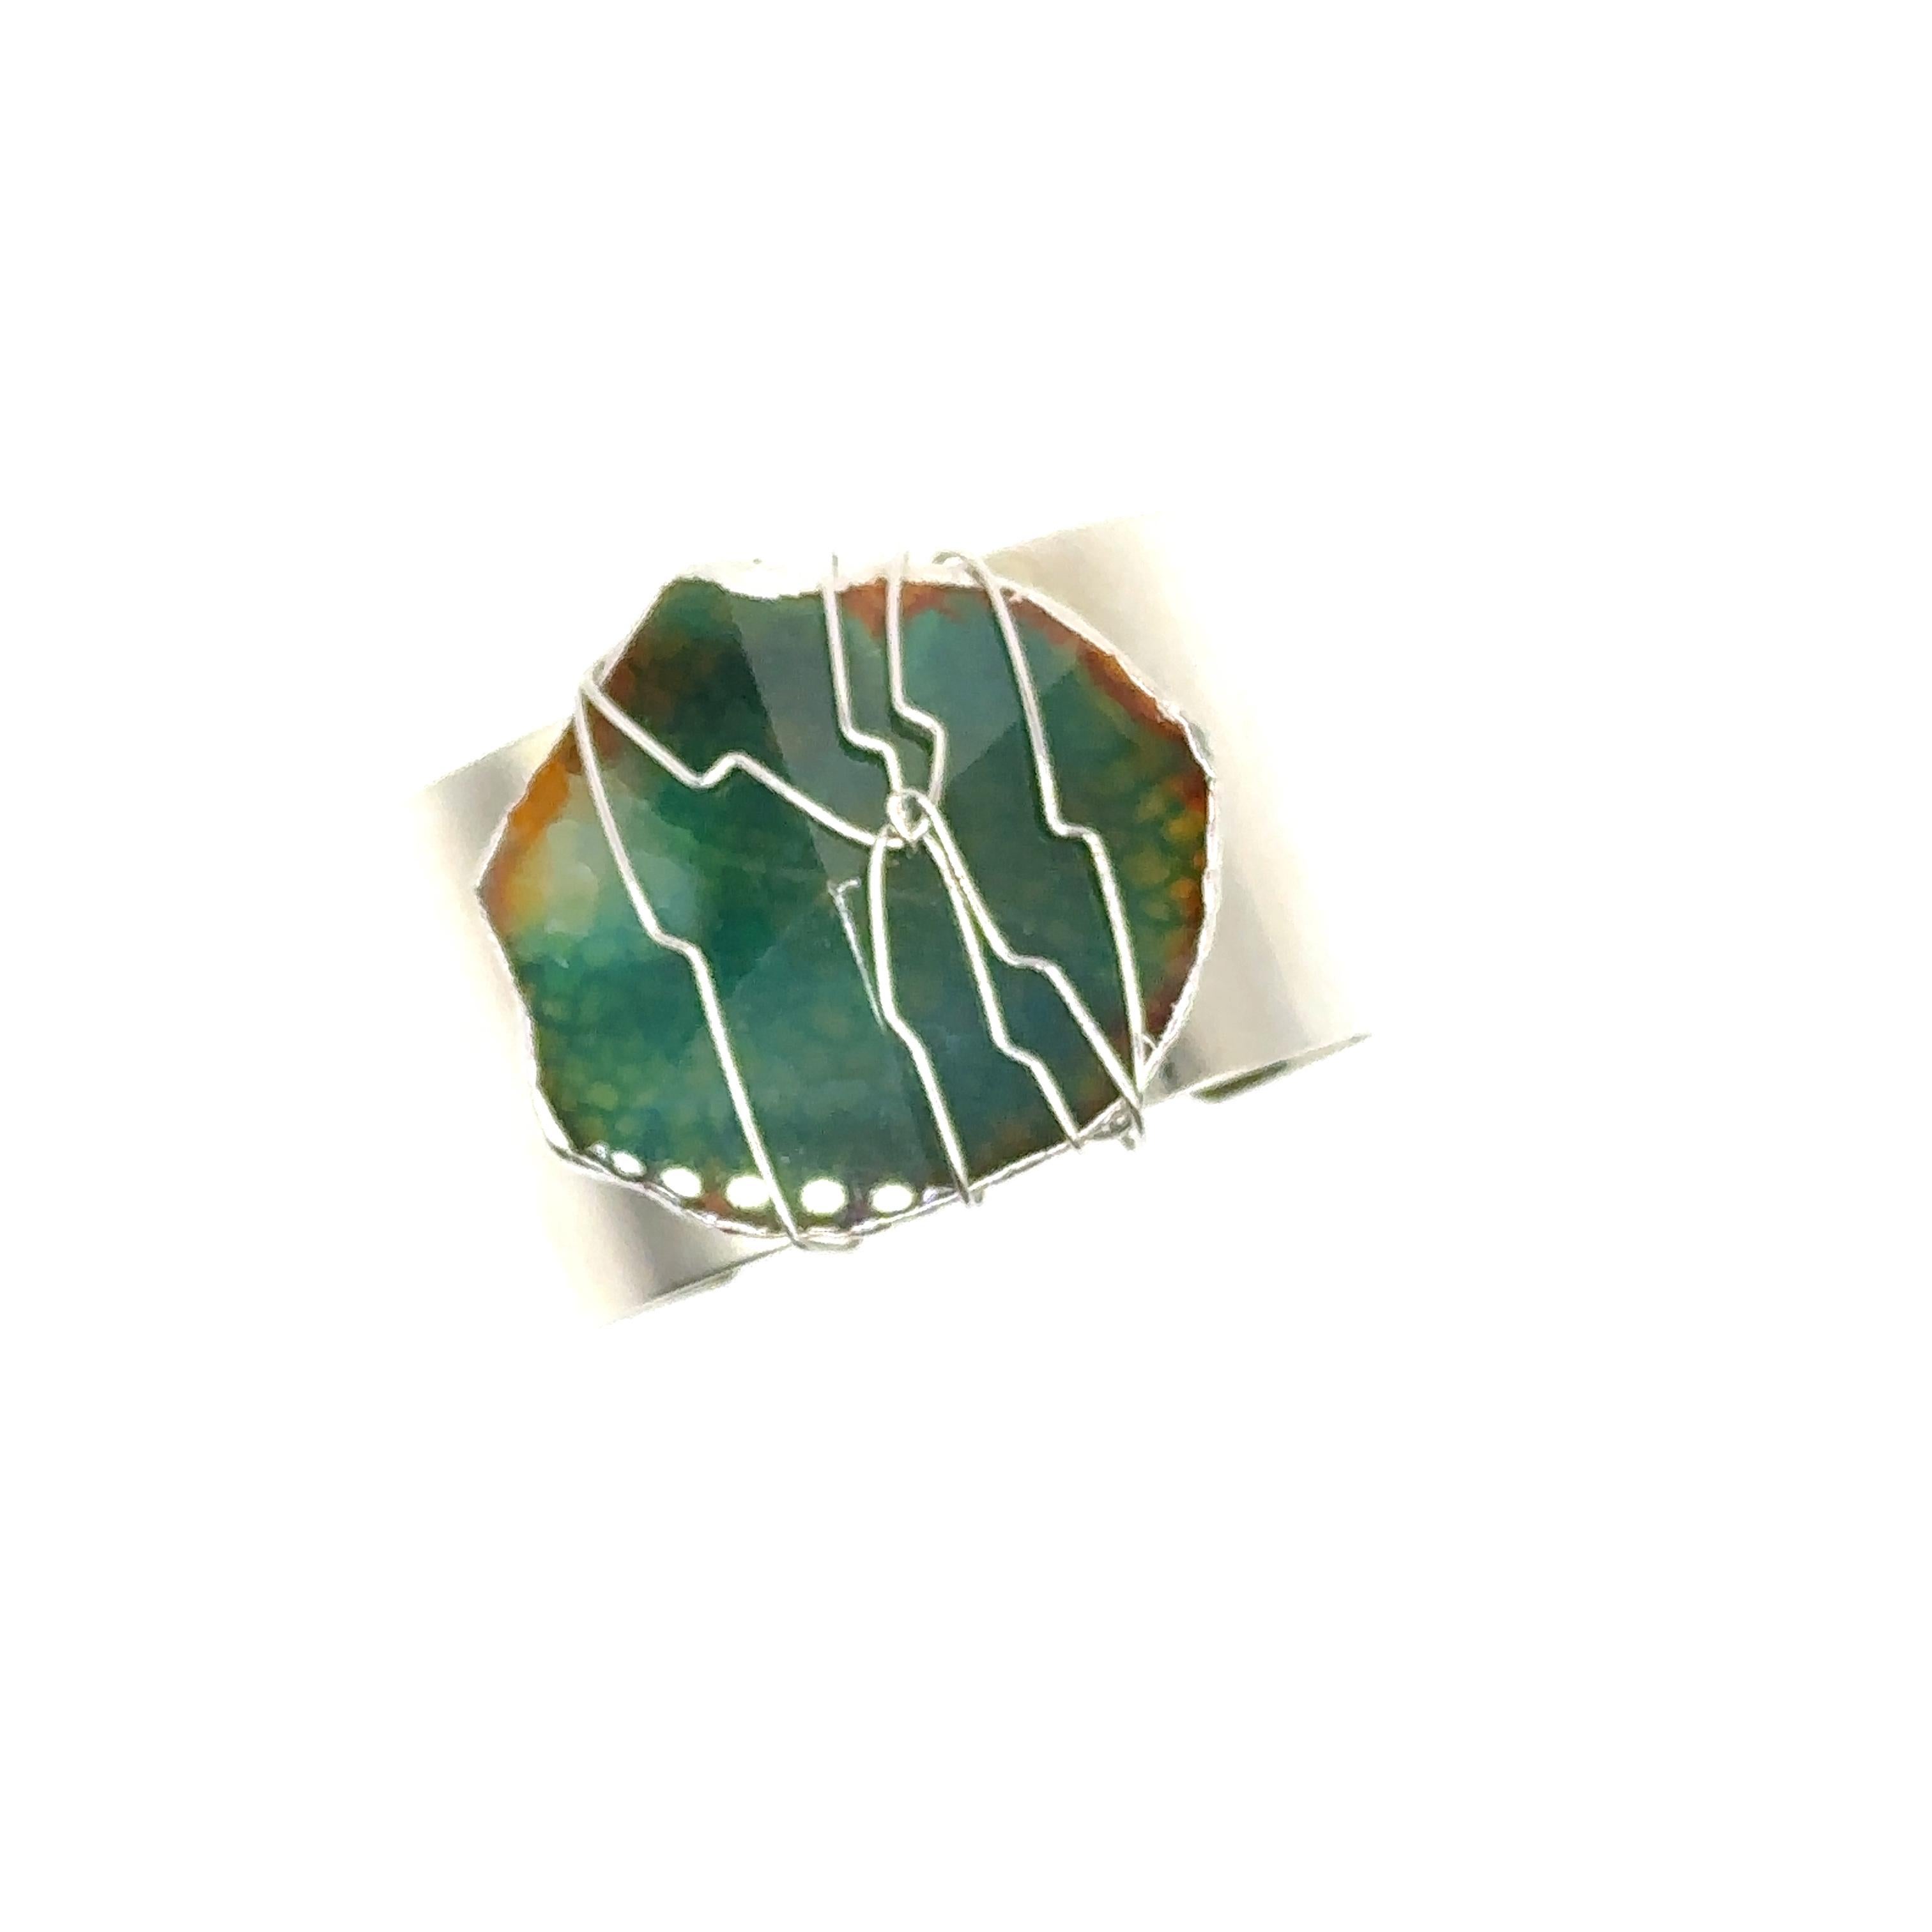 Contemporary Bailey - Bracelet cuff white rhodium plated with green agate